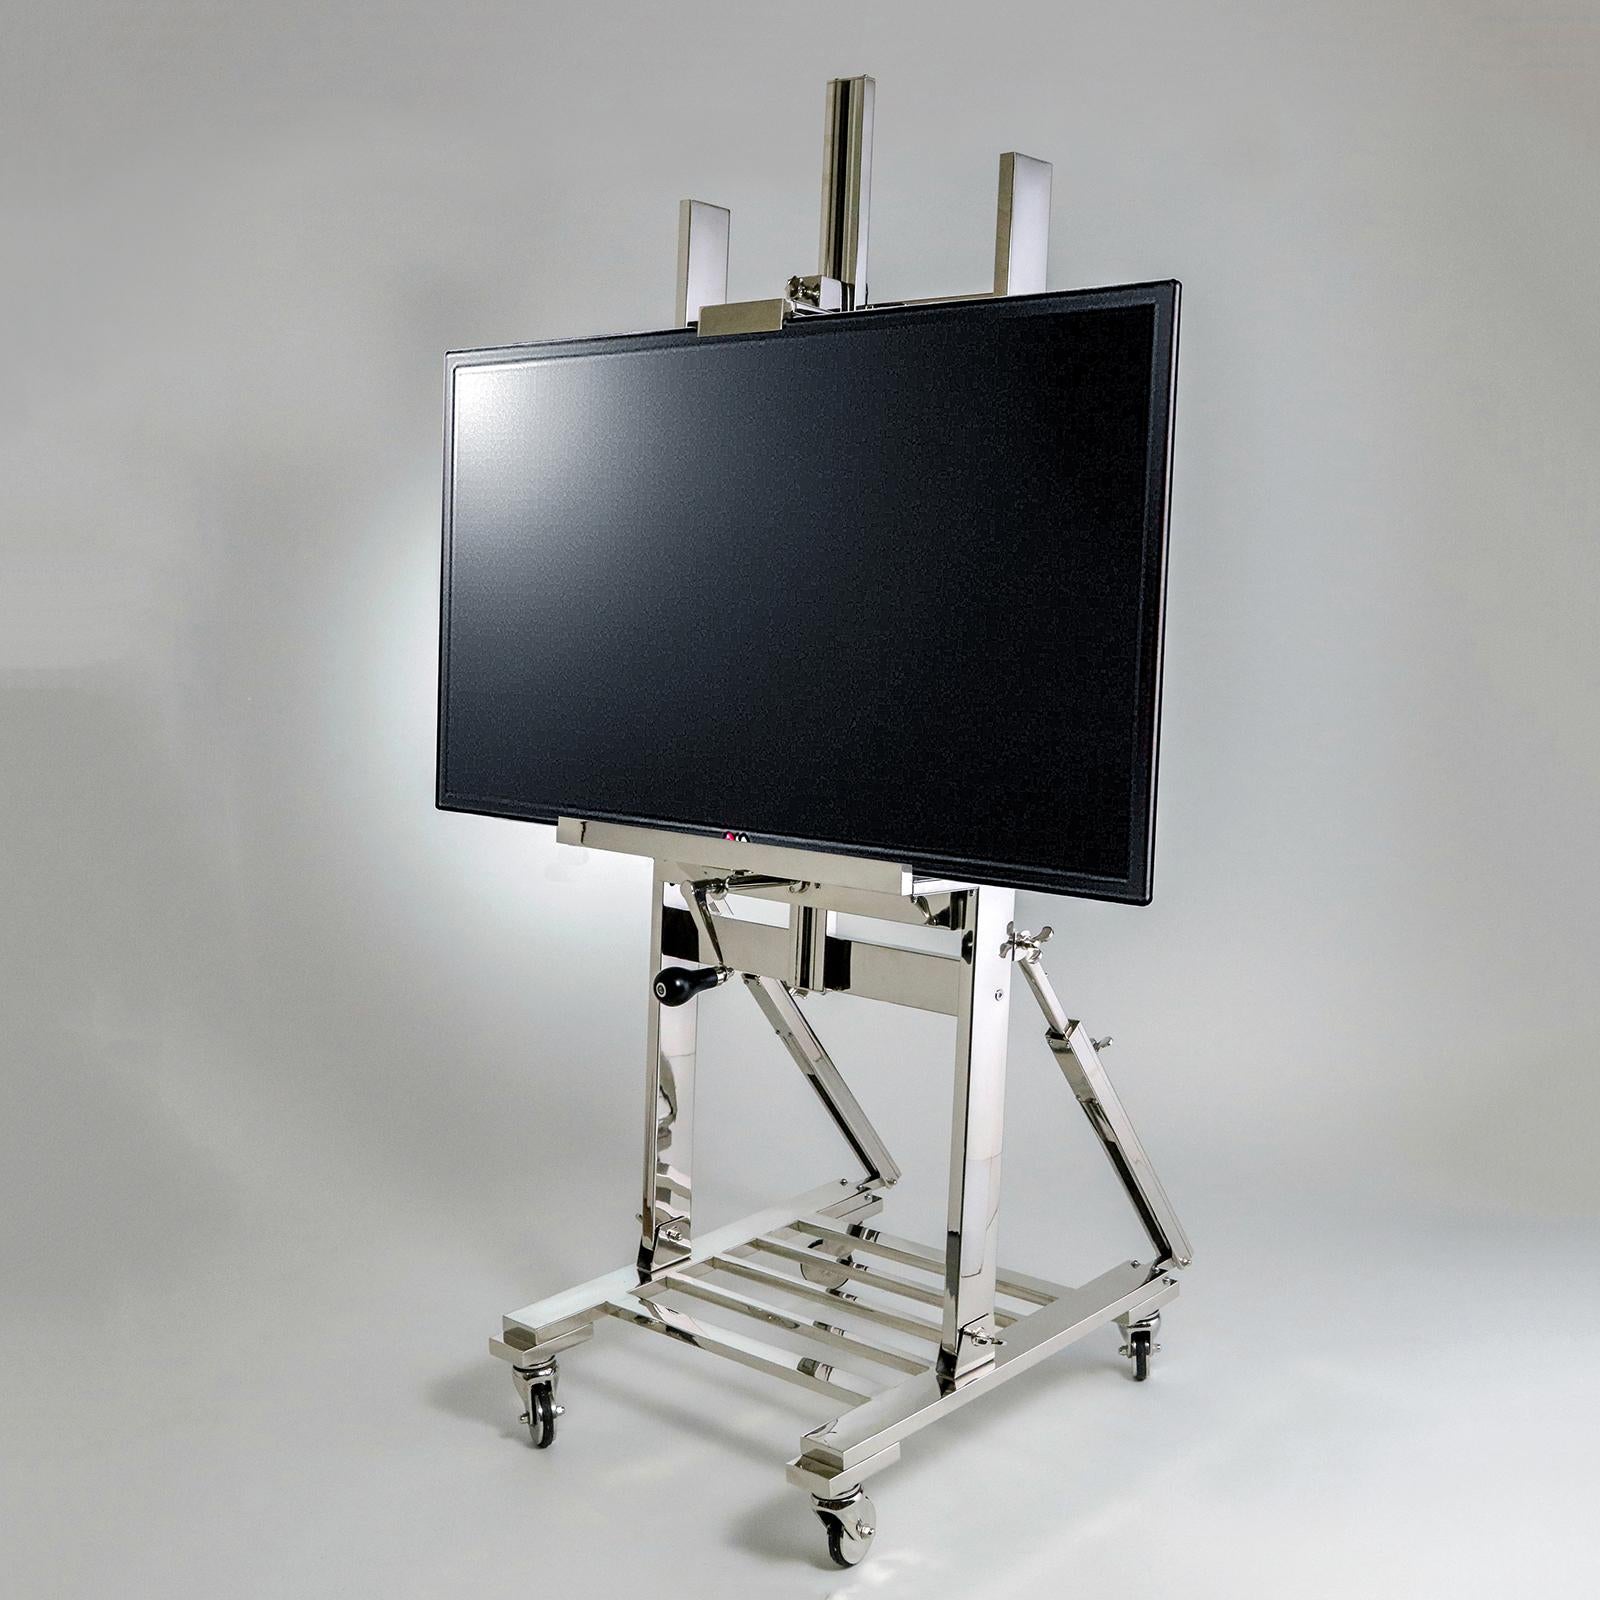 Large polished nickel adjustable TV stand/easel on casters. Hand crank adjusts flat screen height and angle. Slatted base accommodates cable box and/or DVD player.